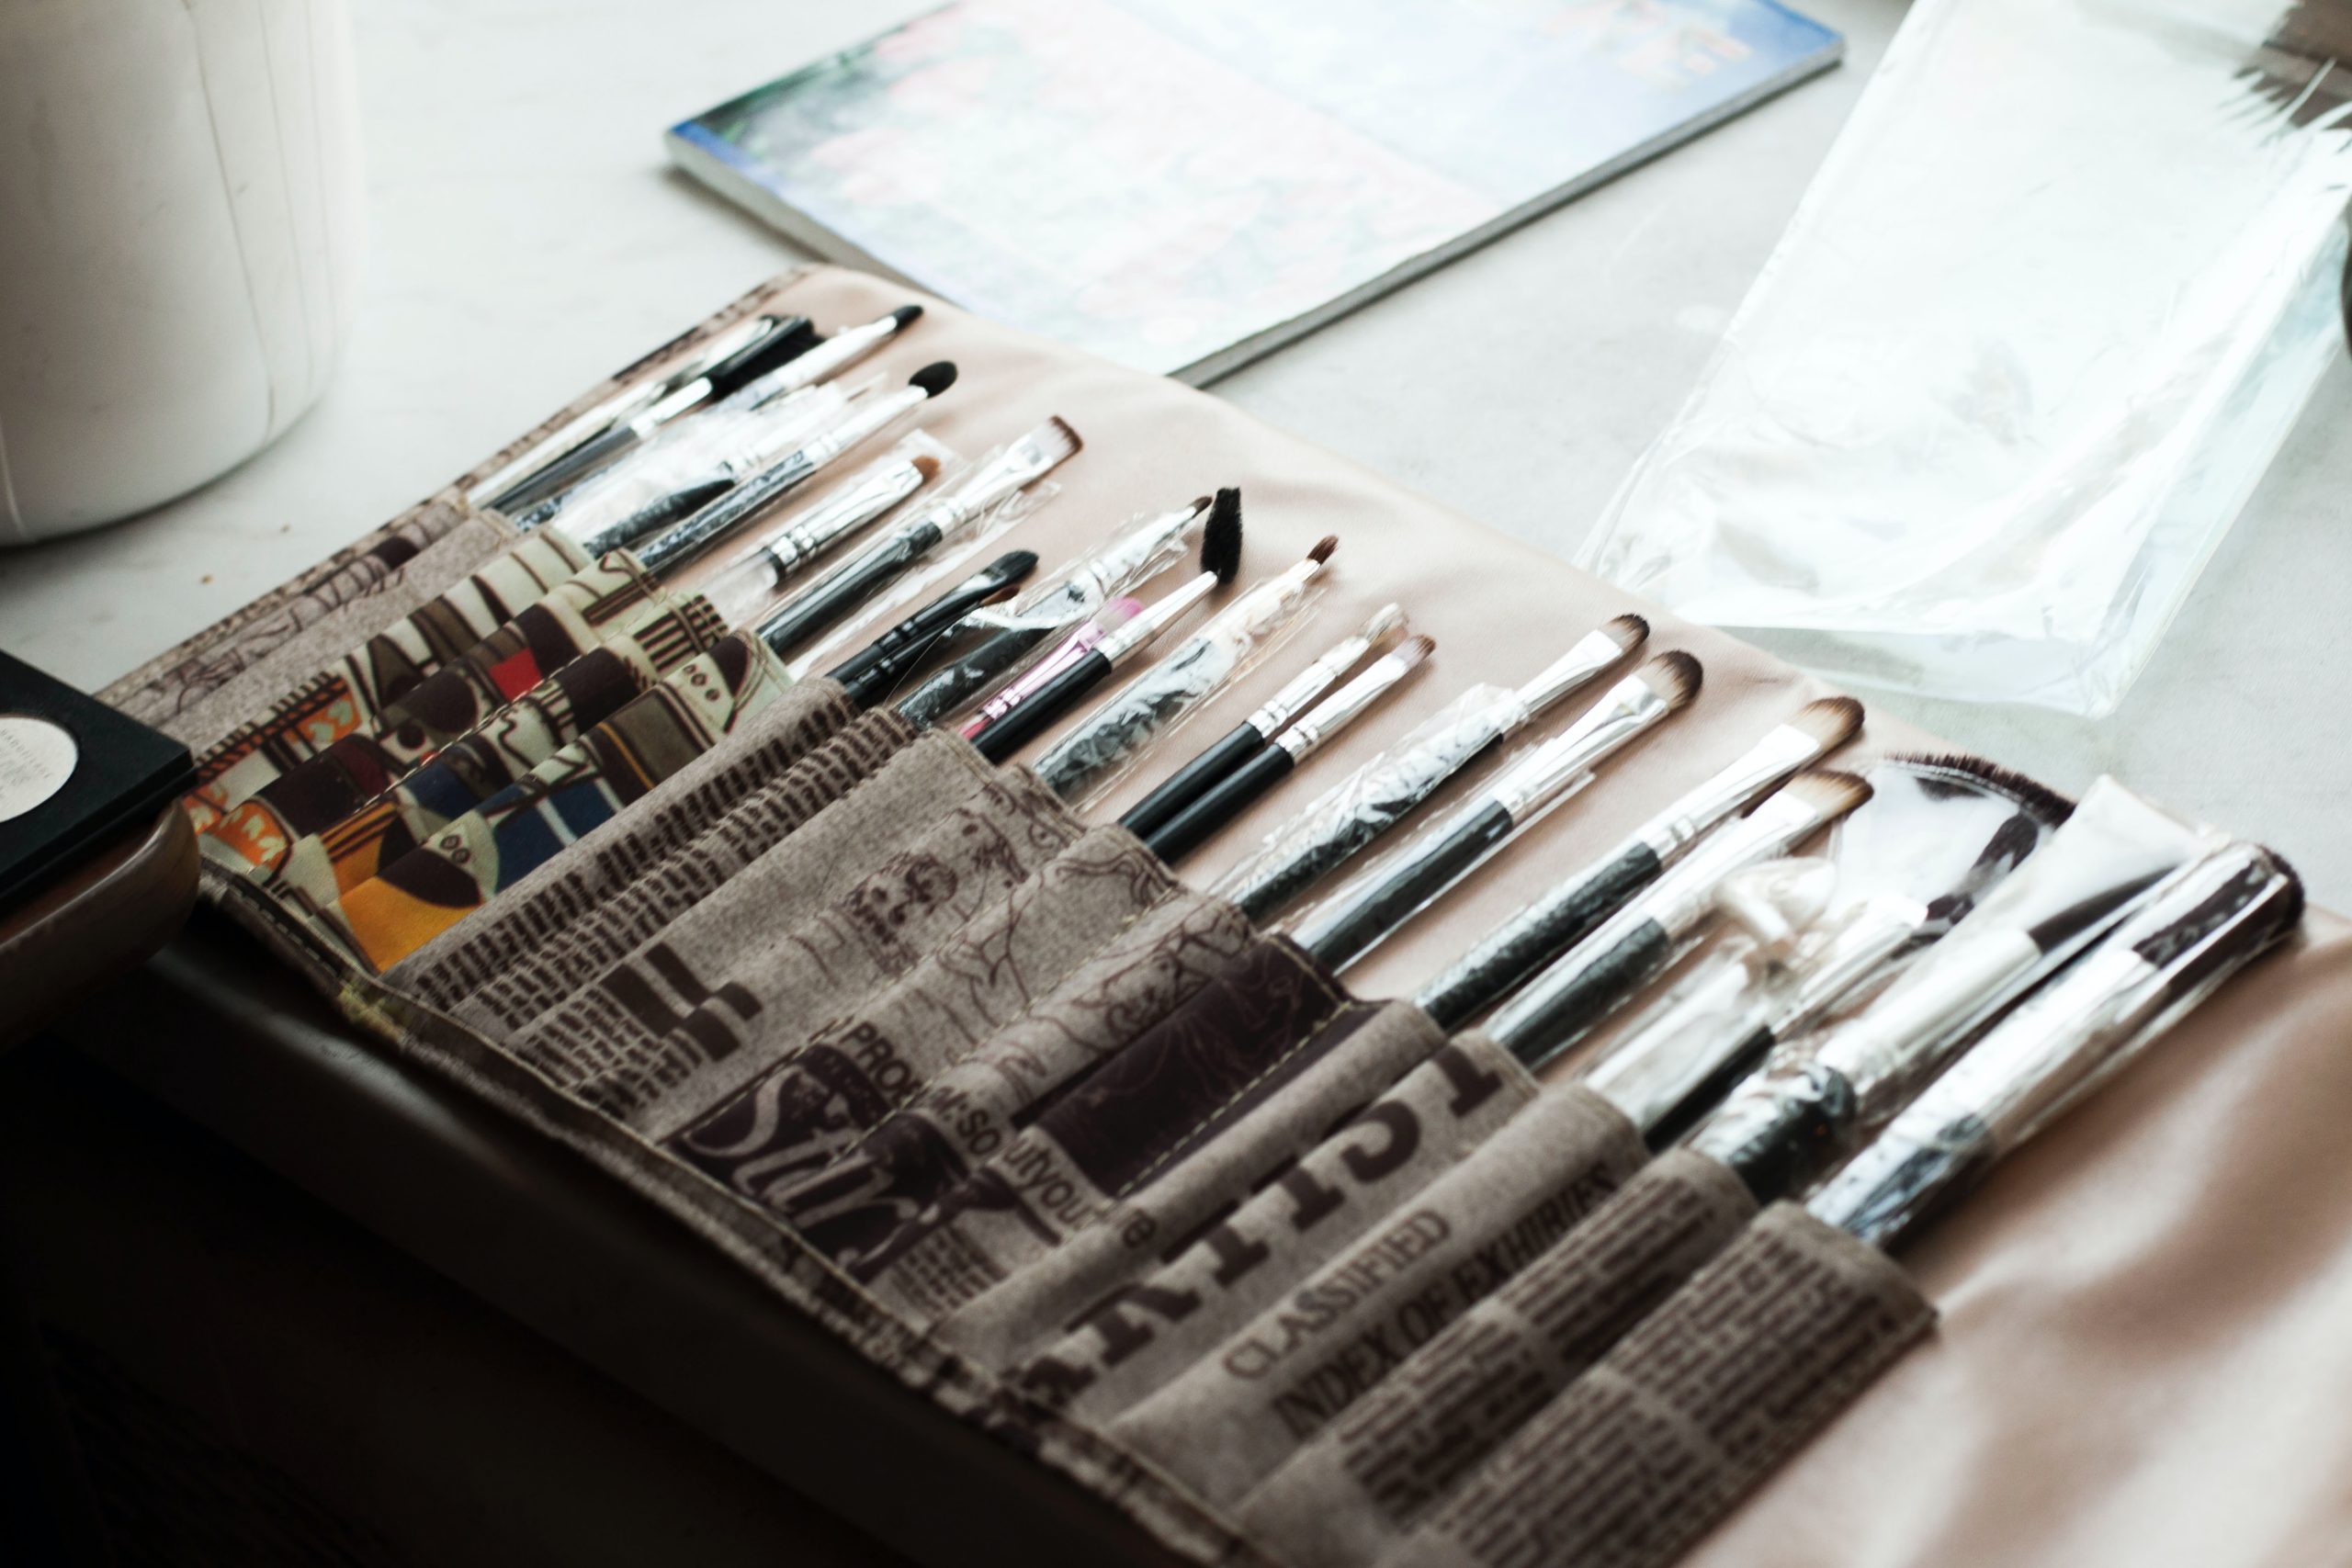 An artist's paintbrushes laid out on a table.